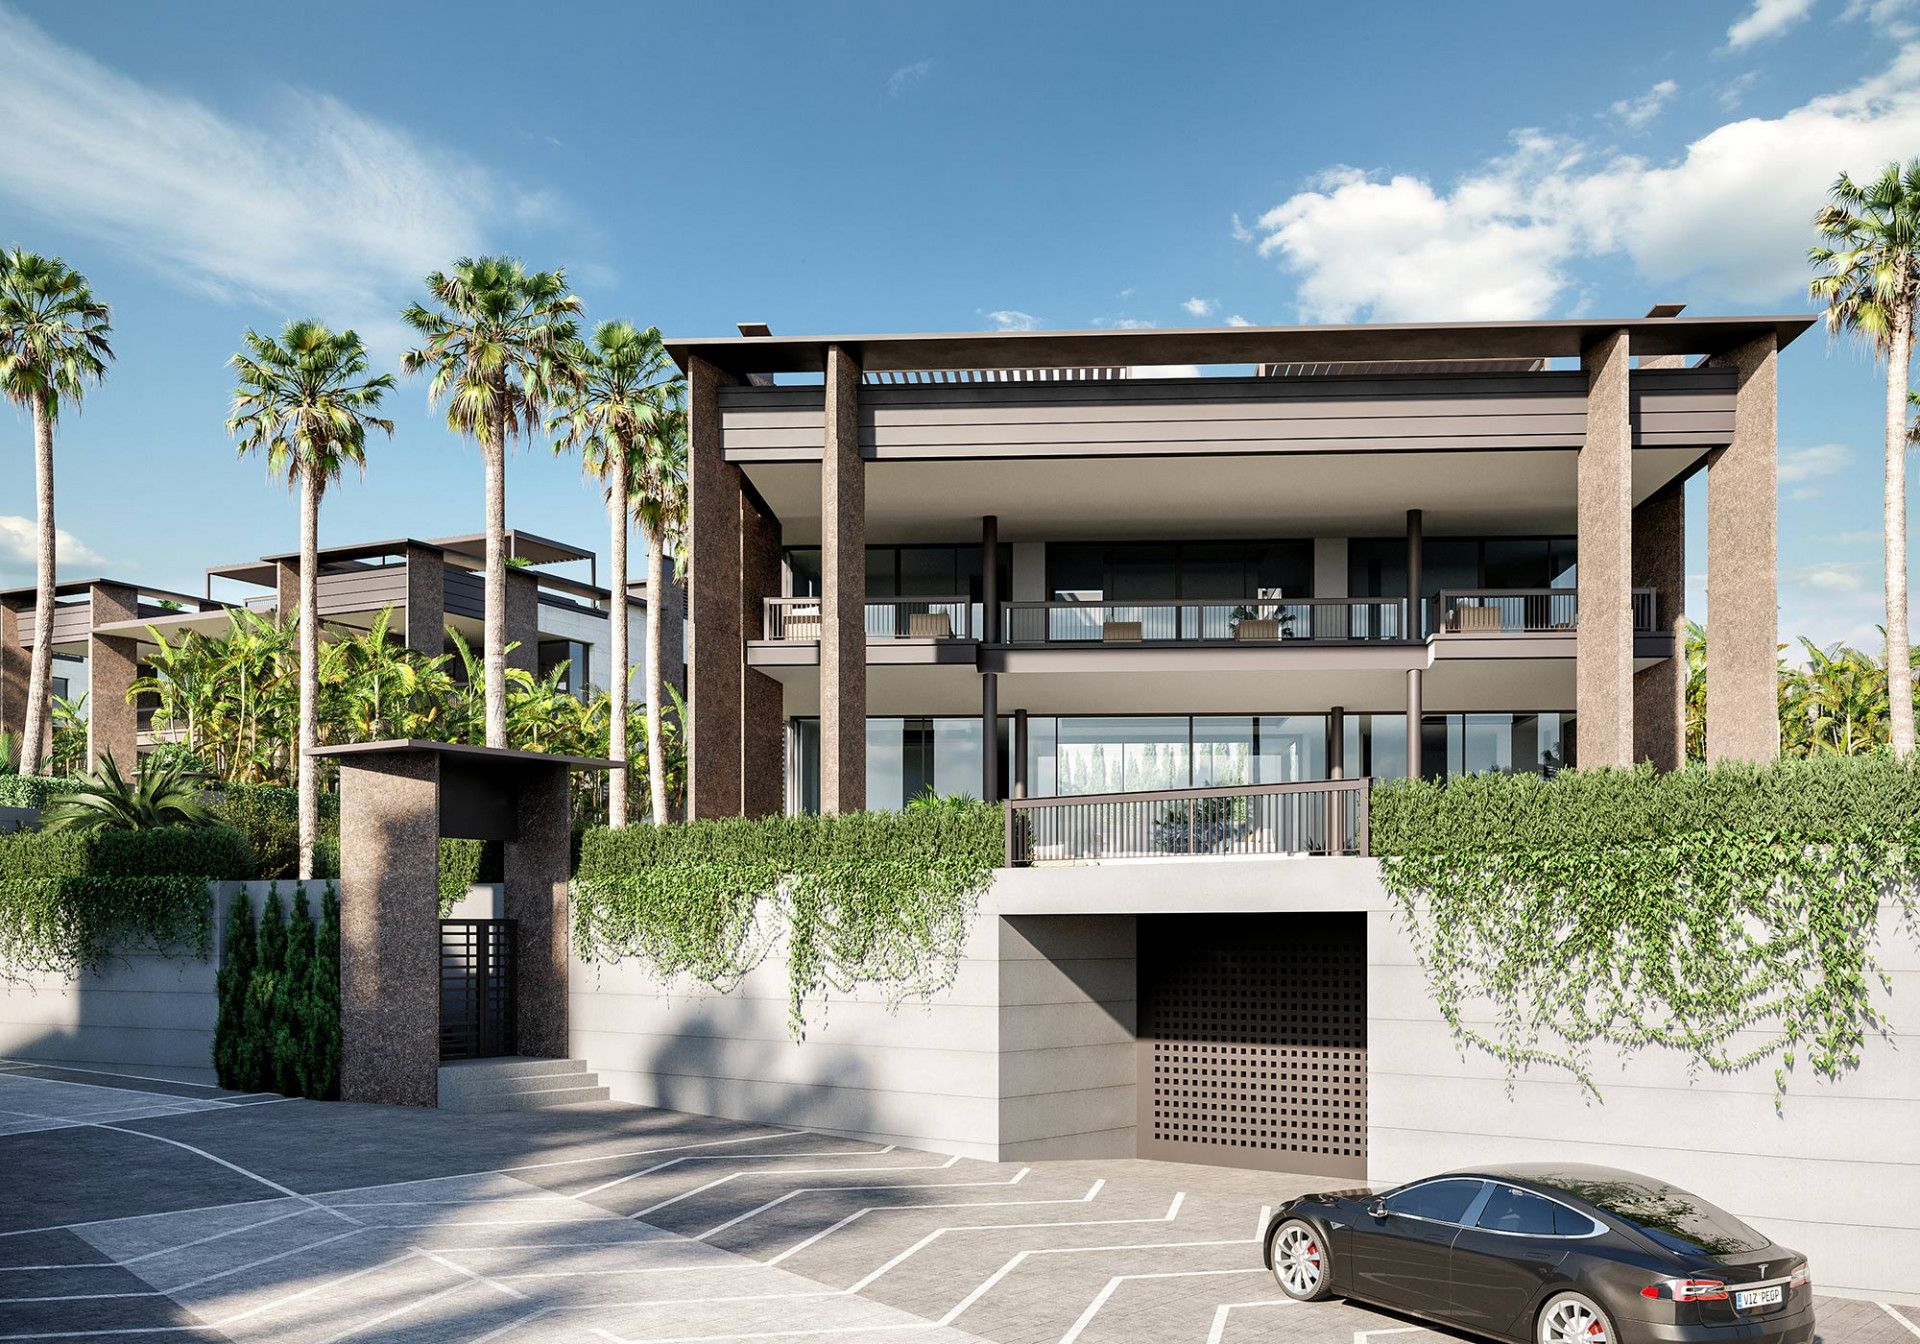 Palacetes de Banús: New luxury residential complex with panoramic views of the Mediterranean Sea, Puerto Banus and the mountains. | Image 4